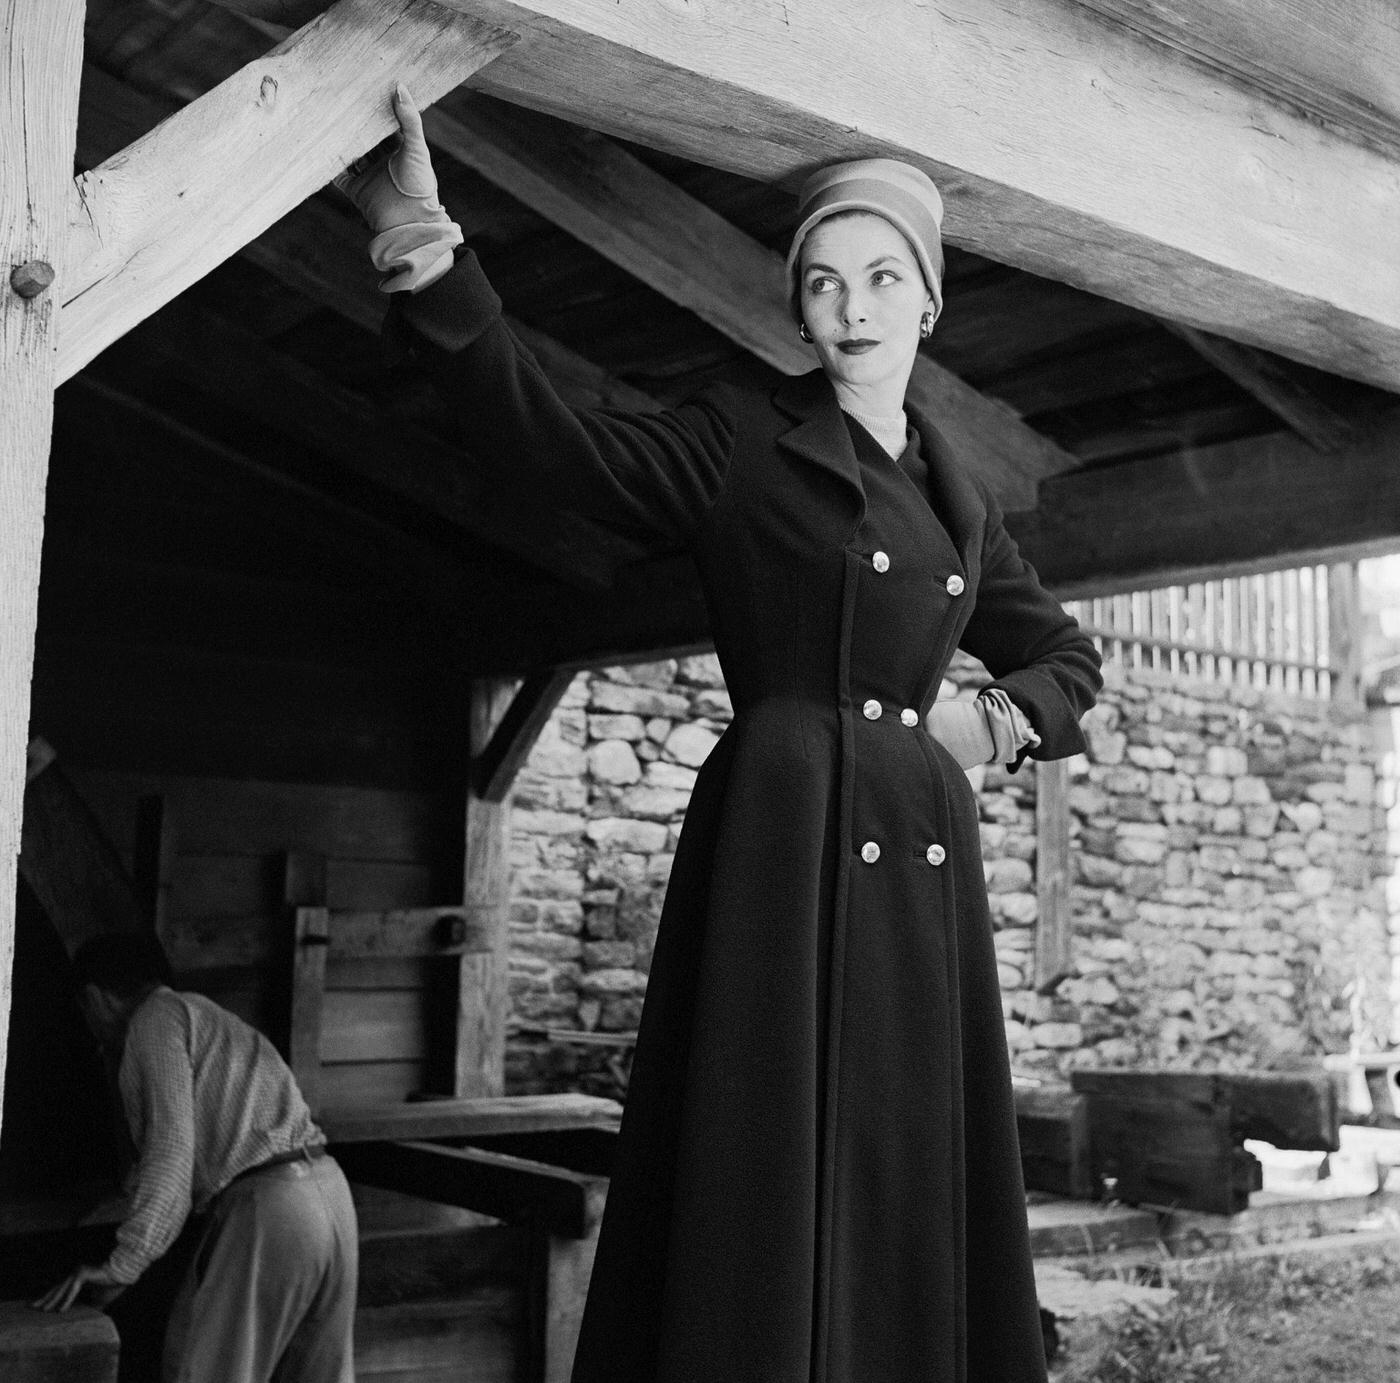 Georgia Hamilton models a wool coat suit by Seymore Fox in the barn at Philipes Manor Hall.